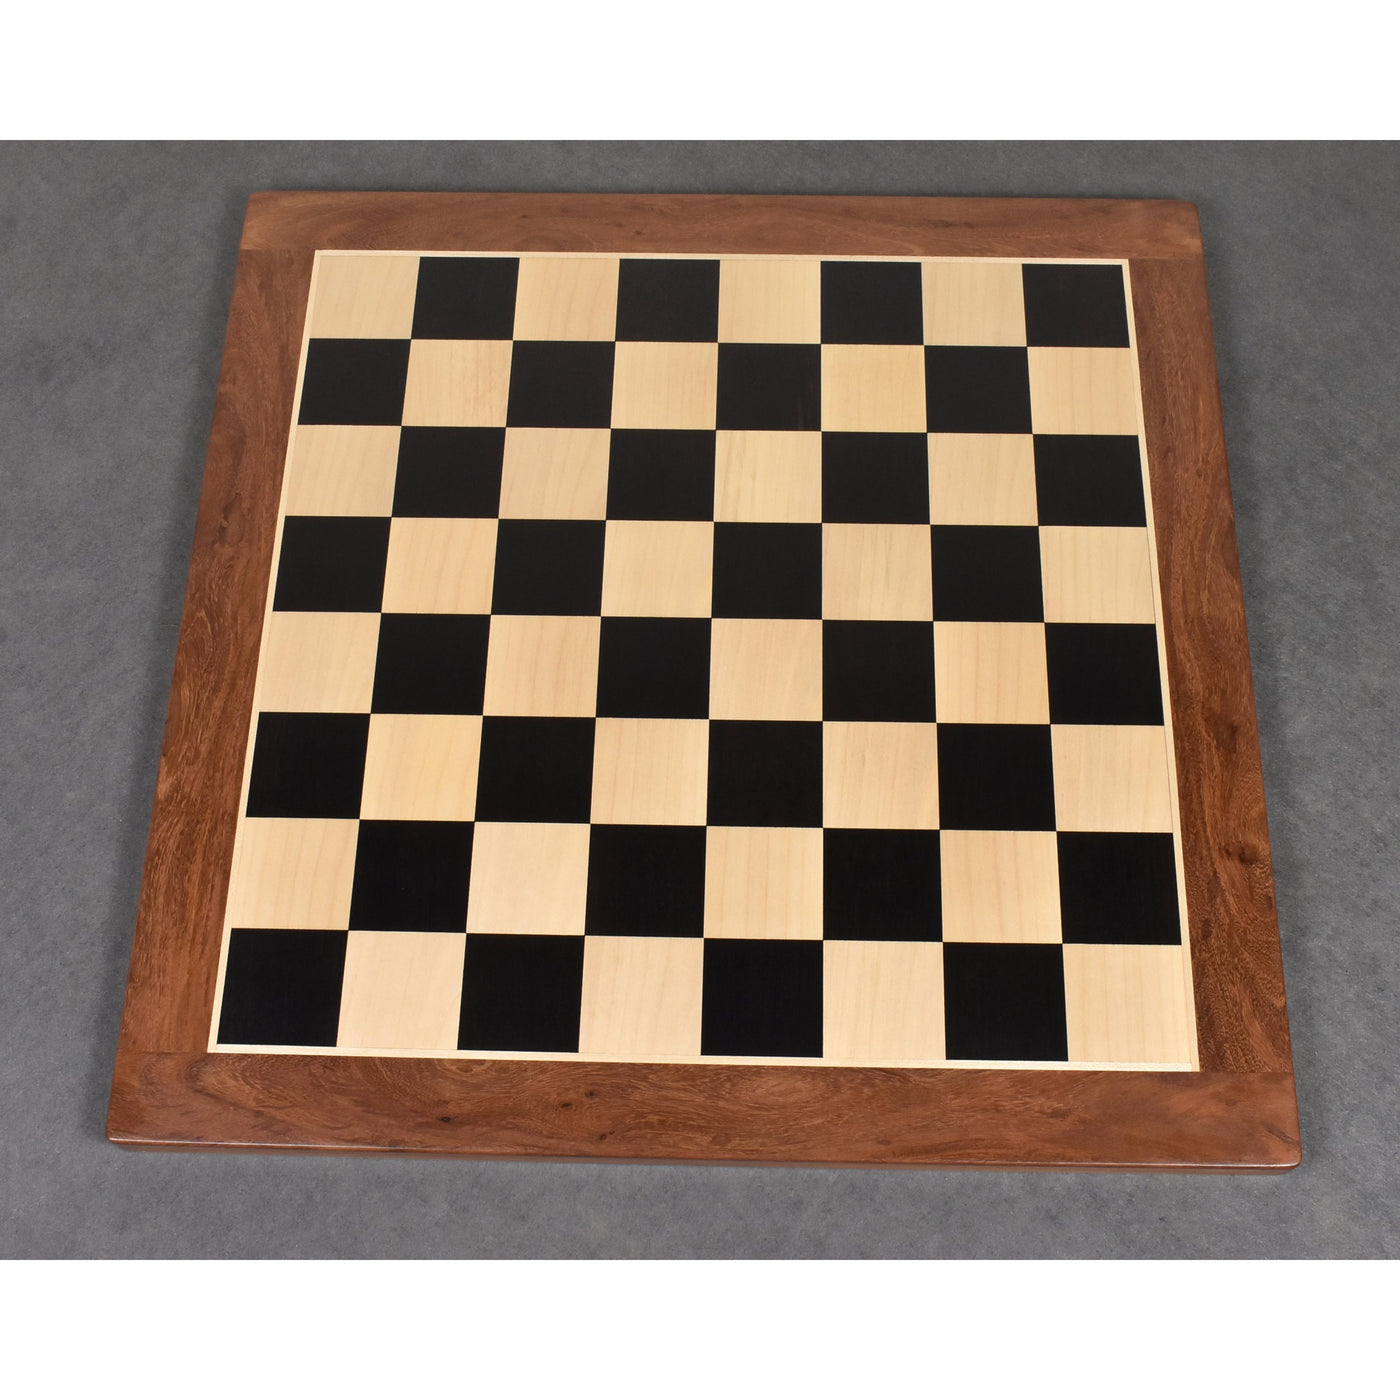 4.6″ Rare Columbian Triple Weighted Ebony Wood Luxury Chess Pieces with 23" Ebony & Maple Wood Chessboard and Leatherette Coffer Storage Box